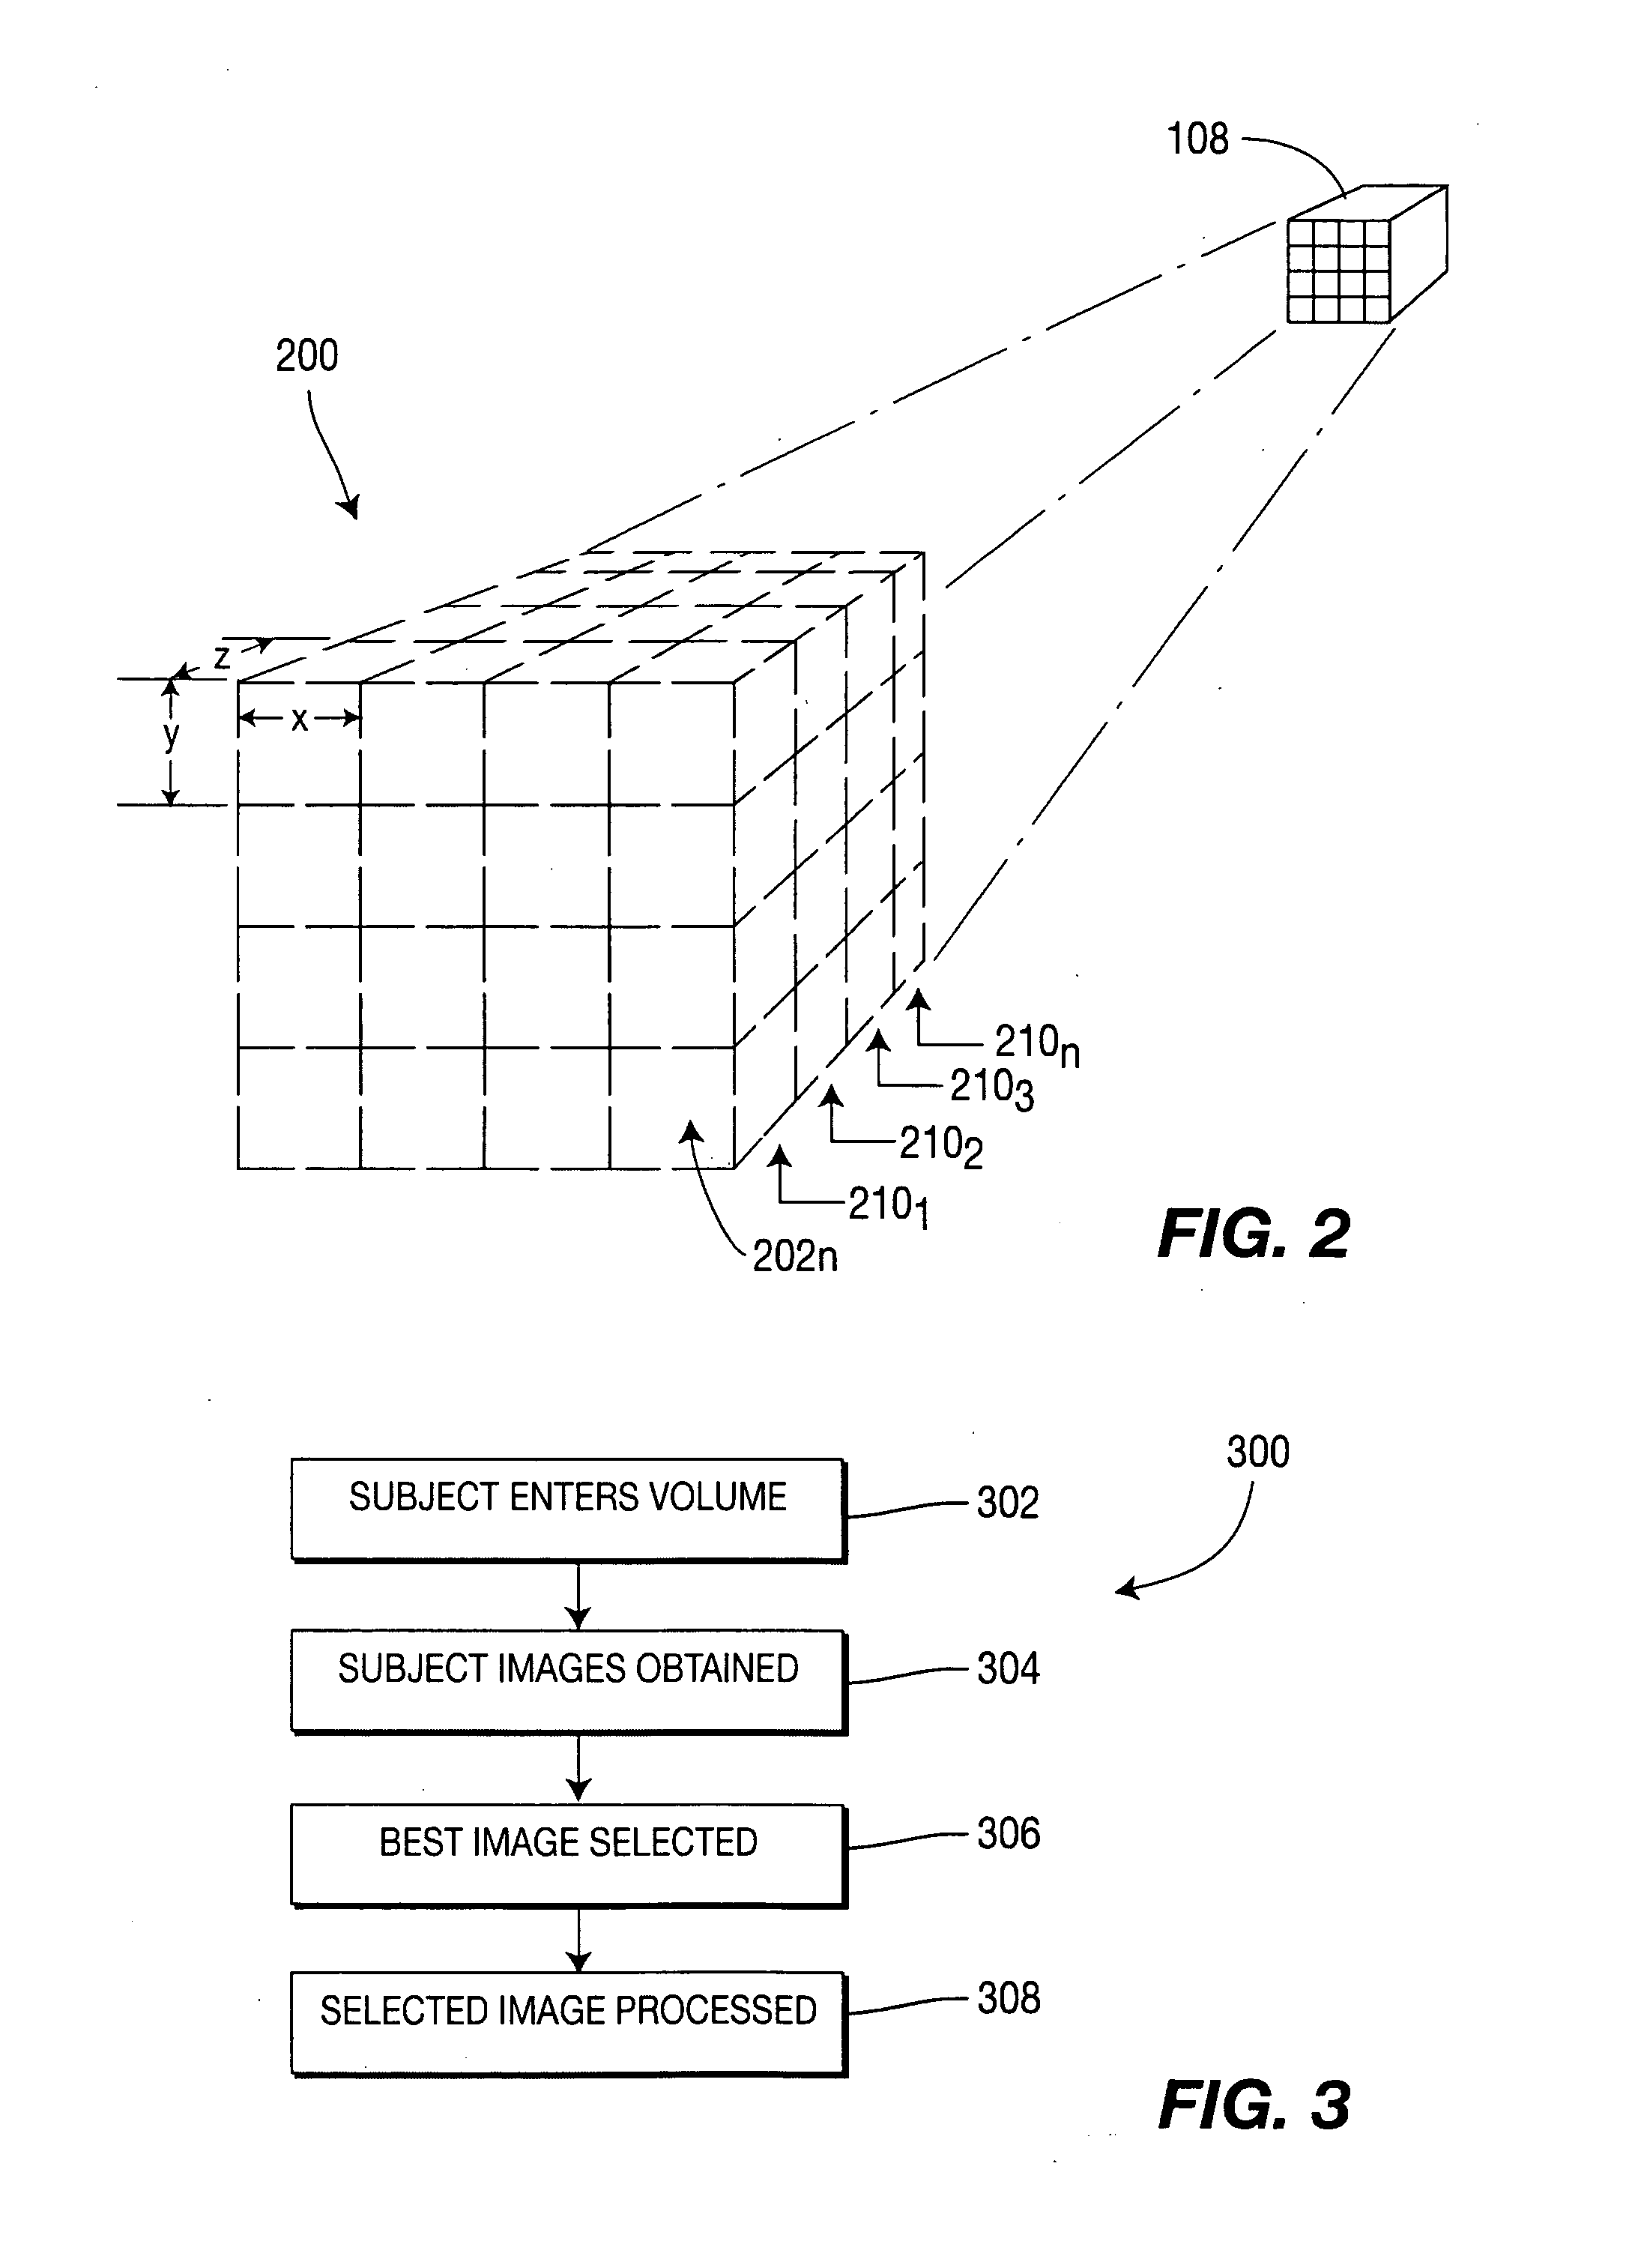 Method and apparatus for obtaining iris biometric information from a moving subject